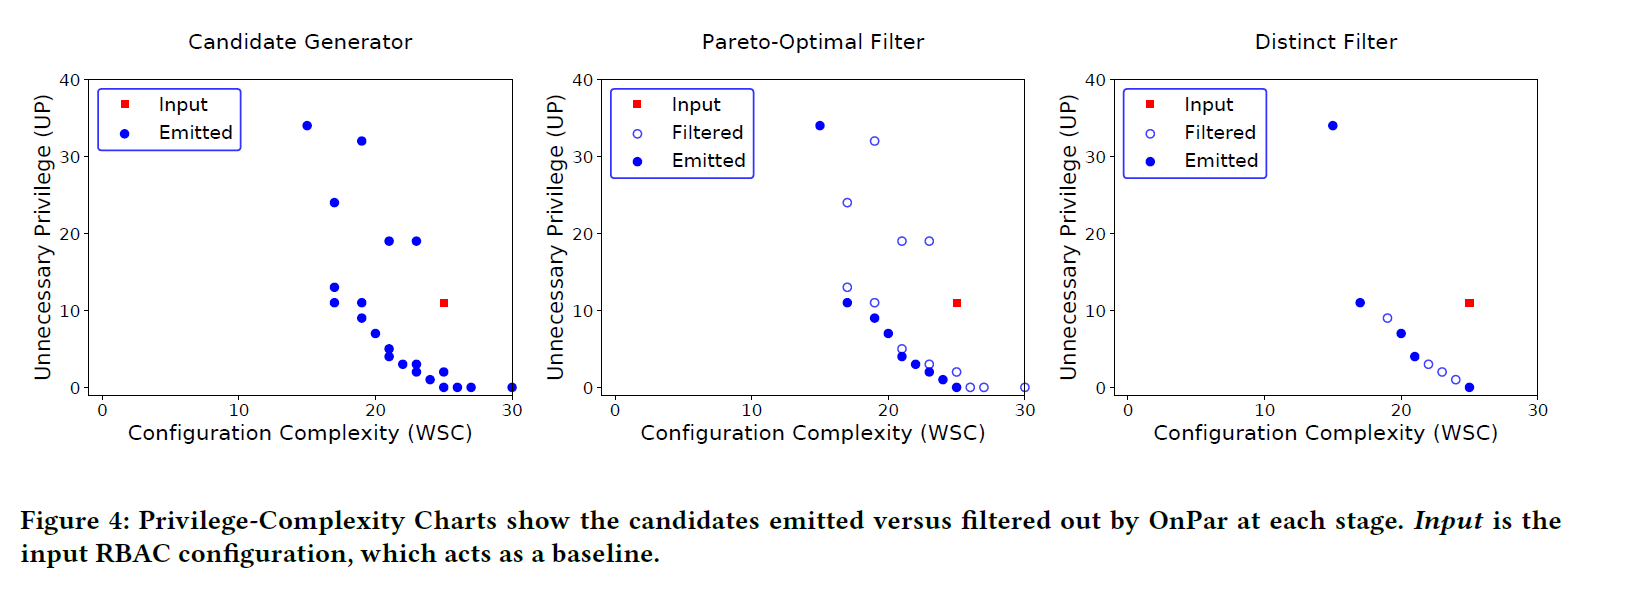 Figure 4: Privilege-Complexity Charts show the candidates emitted versus filtered out by OnPar at each stage. Input is the input RBAC configuration, which acts as a baseline